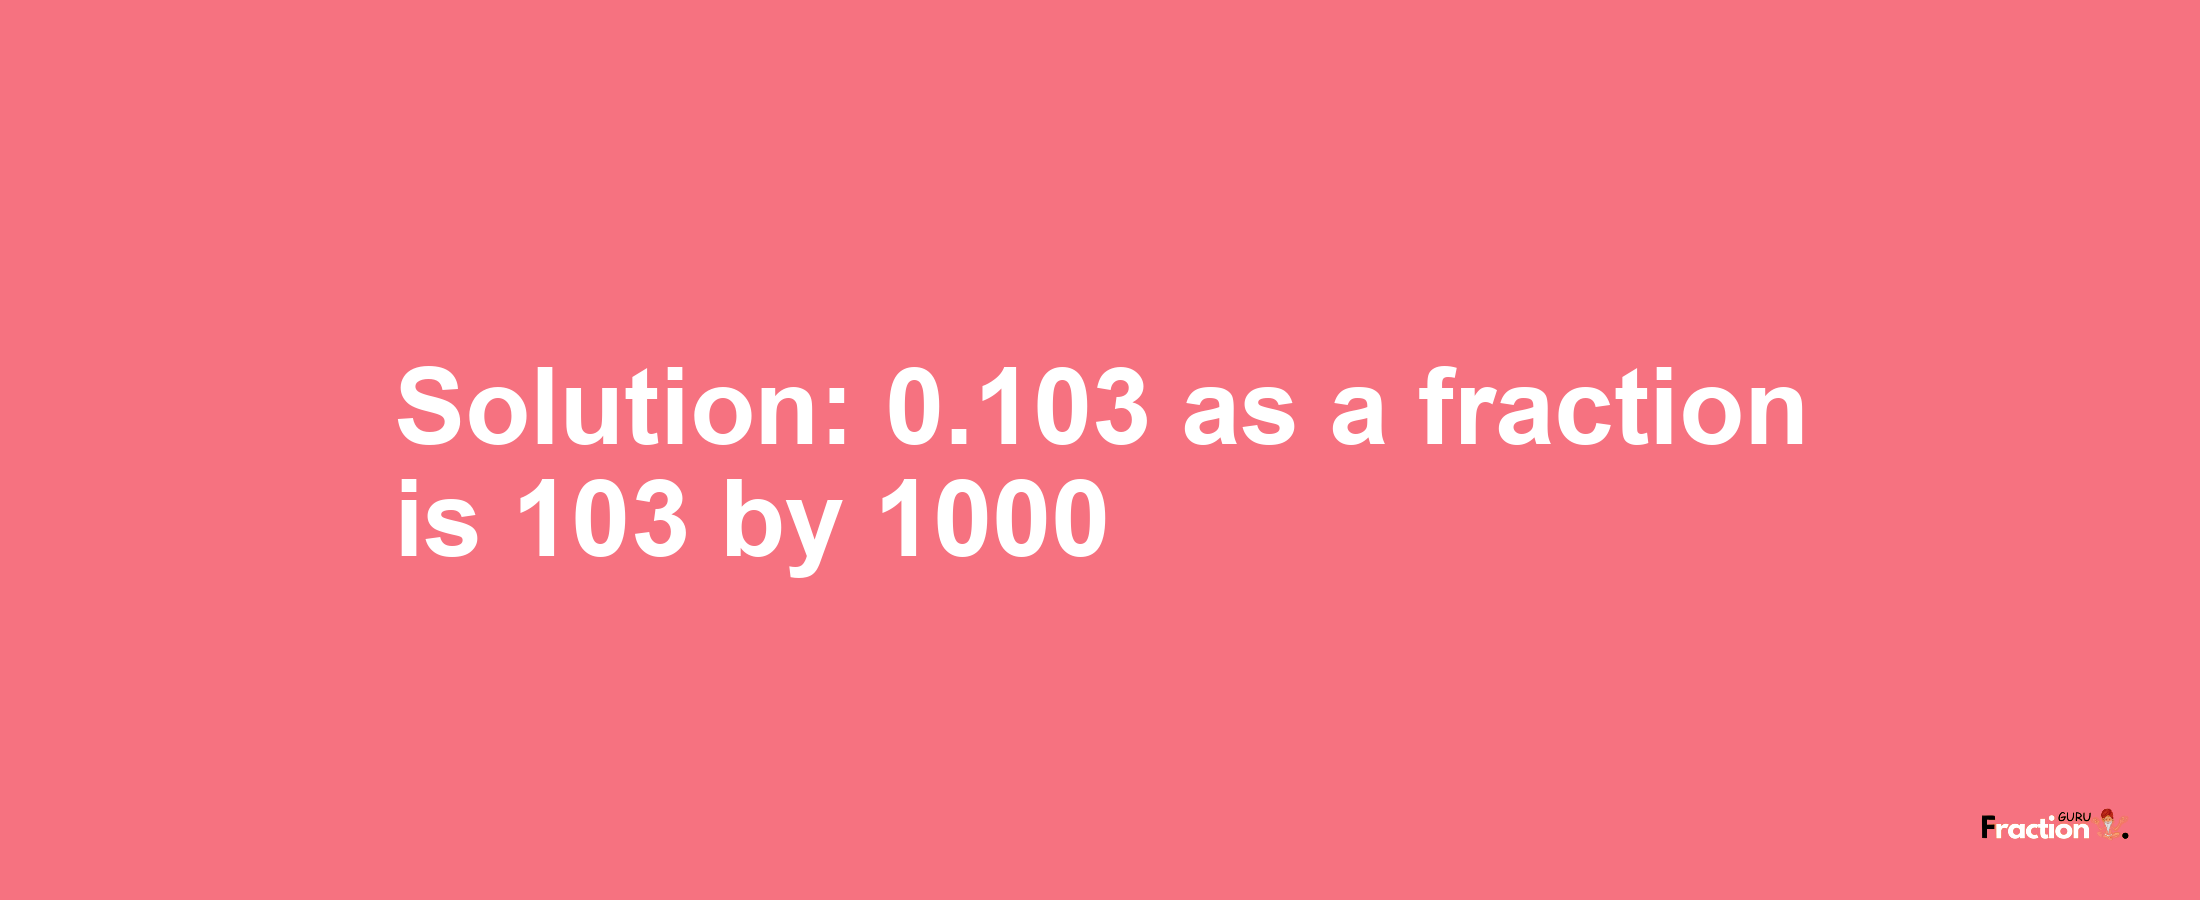 Solution:0.103 as a fraction is 103/1000